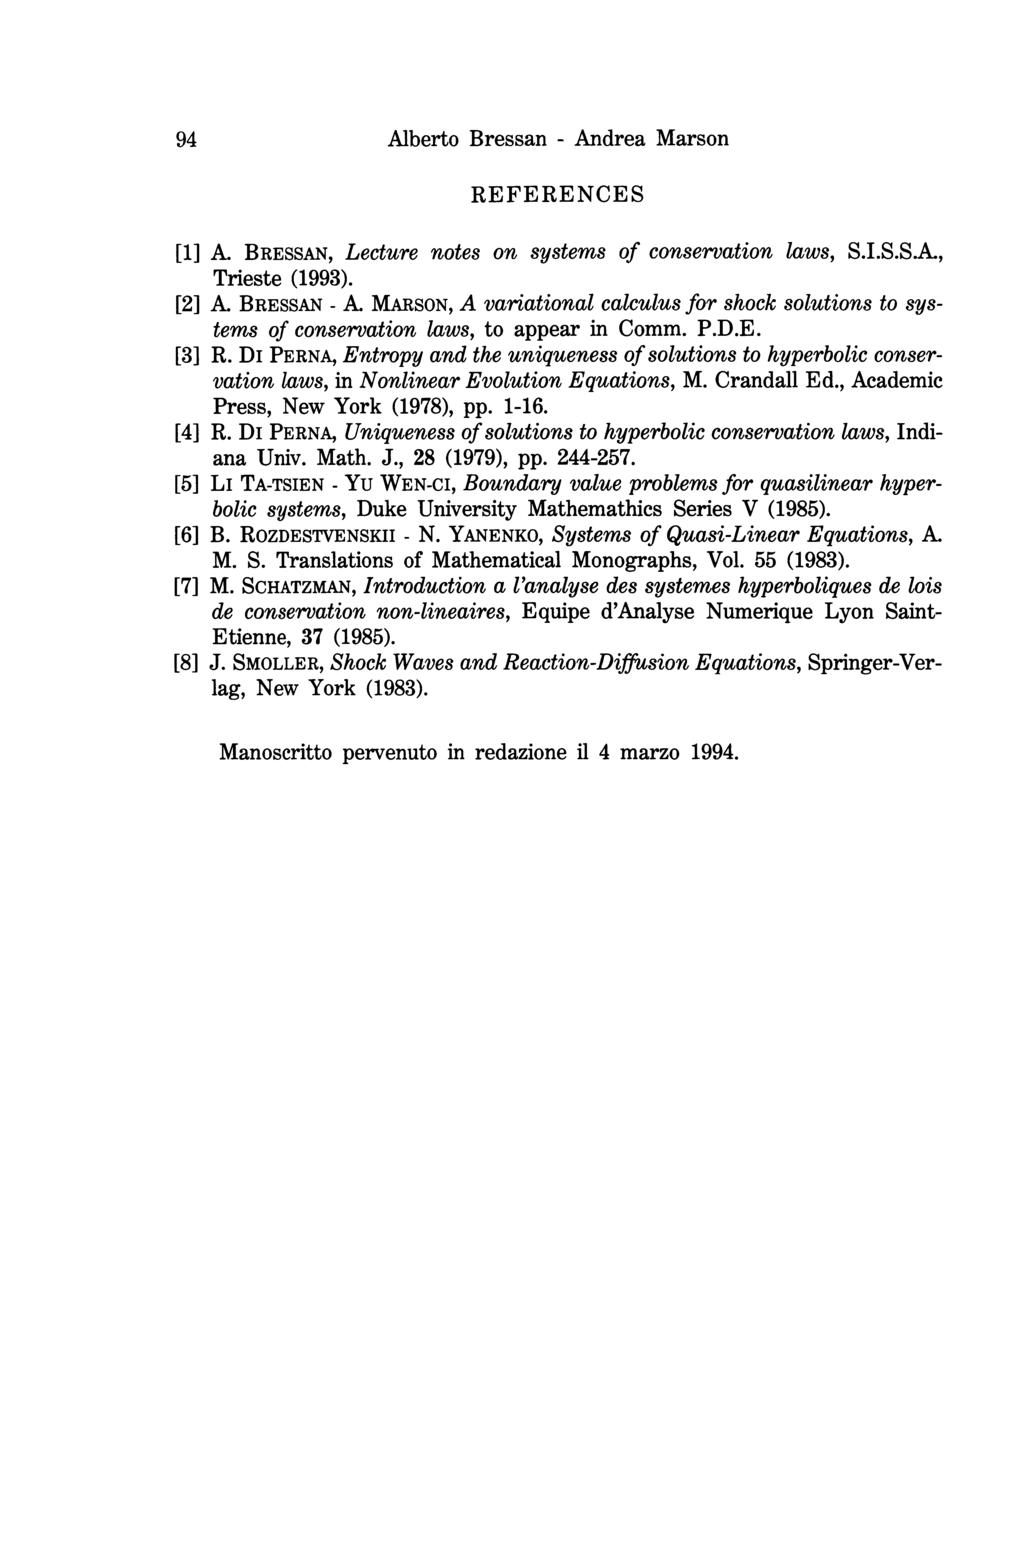 94 REFERENCES [1] A. BRESSAN, Lecture notes on systems of conservation laws, S.I.S.S.A., Trieste (1993). [2] A. BRESSAN - A.